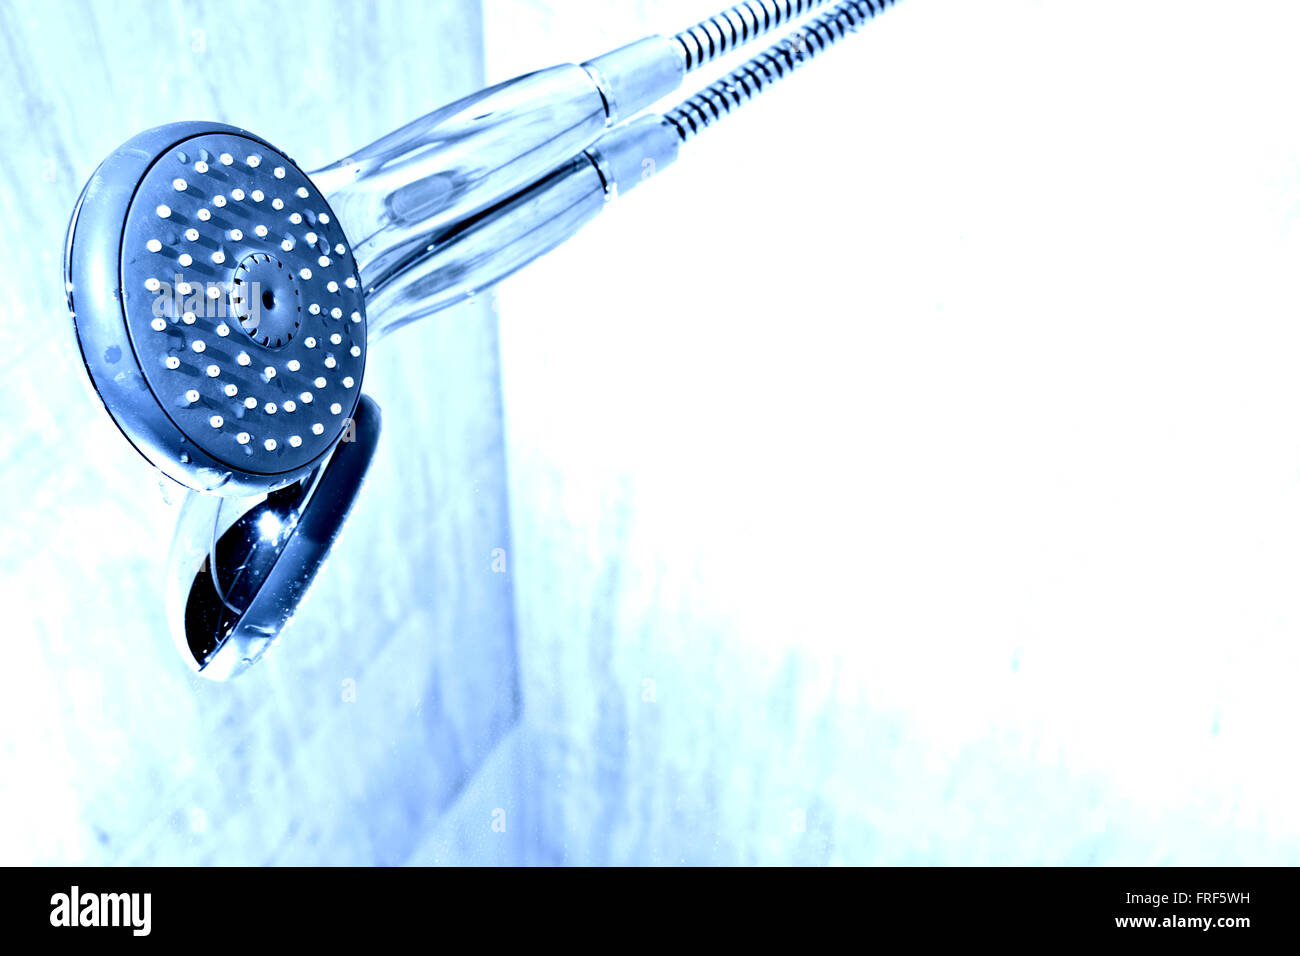 https://c8.alamy.com/comp/FRF5WH/handshower-and-water-in-the-bath-FRF5WH.jpg